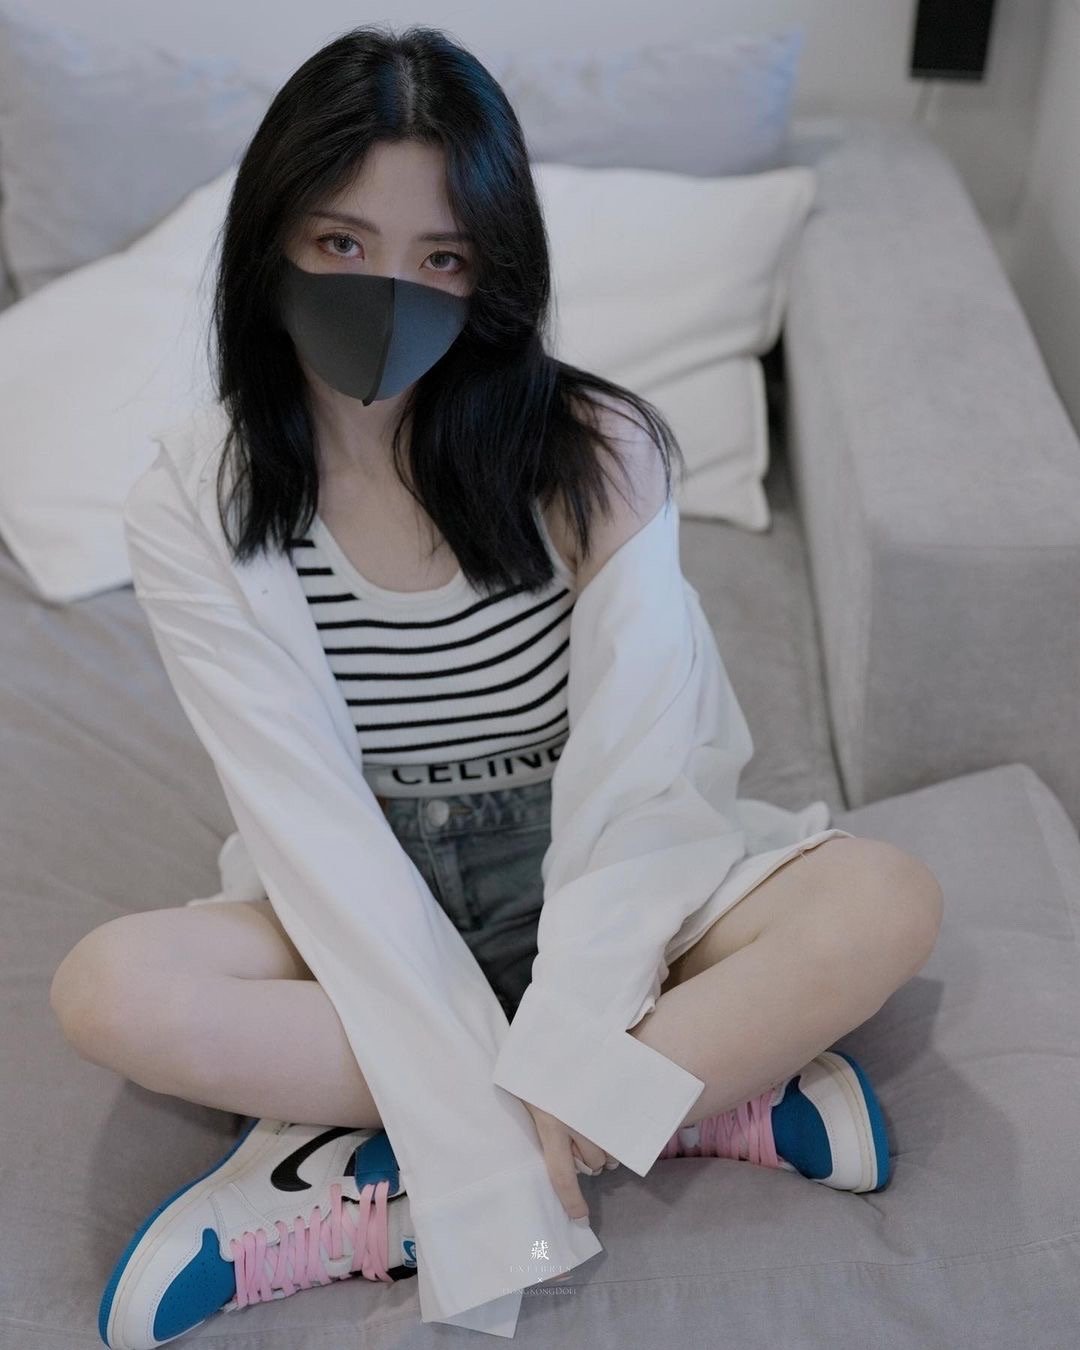 mspuiyi-08 – Onlyfans Asia | Onlyfans 亚洲 | 网黄视频 | 做爱变现